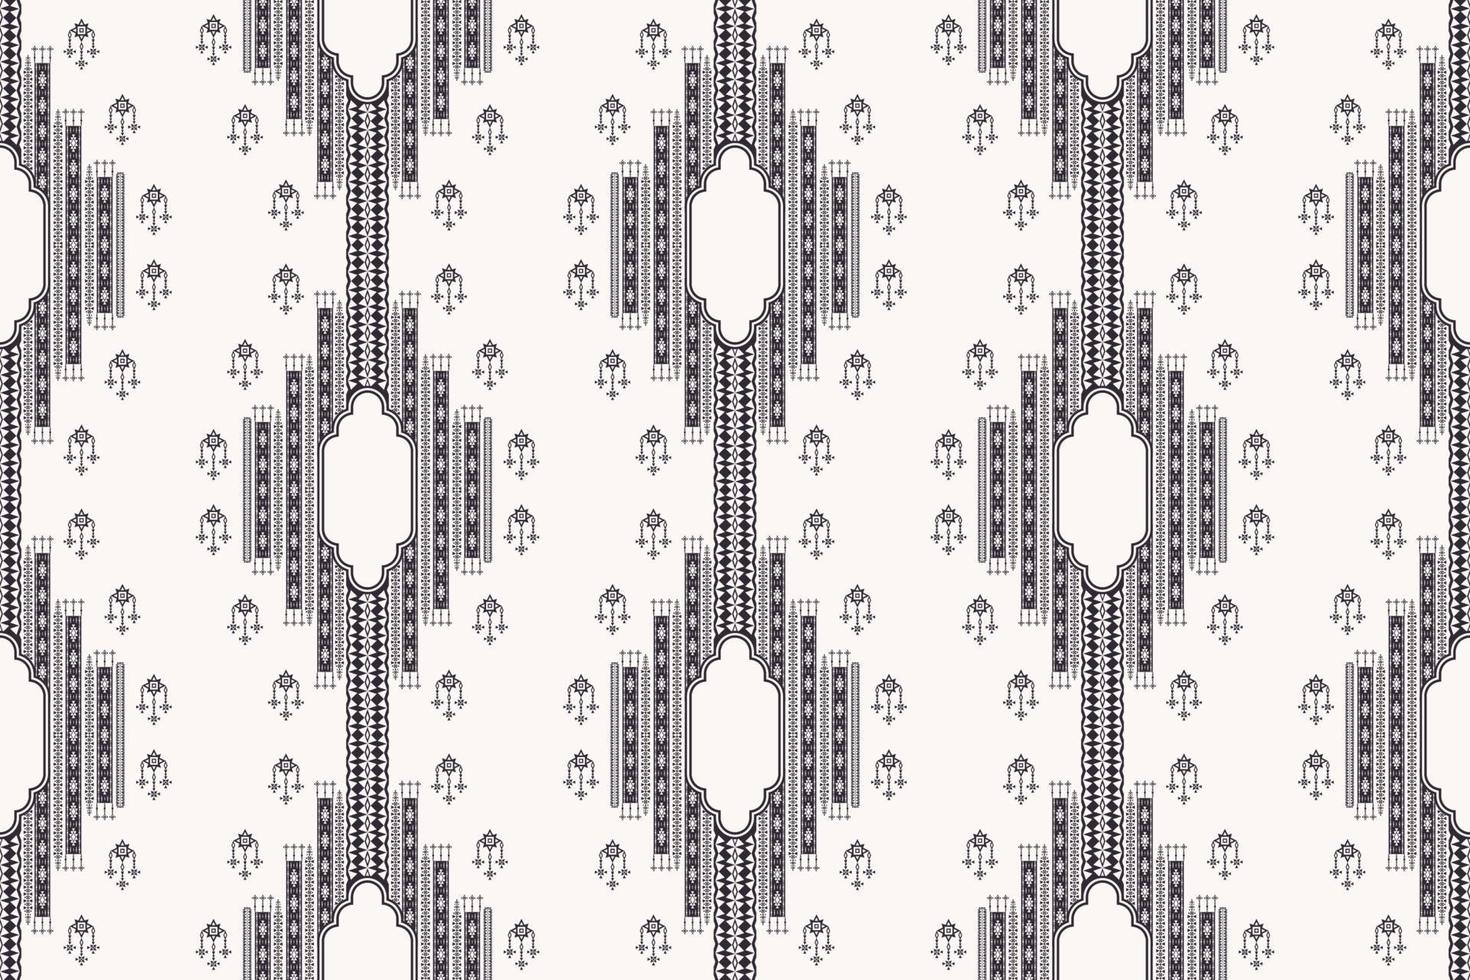 Ethnic aztec geometric shape seamless pattern background. Use for fabric, textile, interior decoration elements, upholstery, wrapping. vector